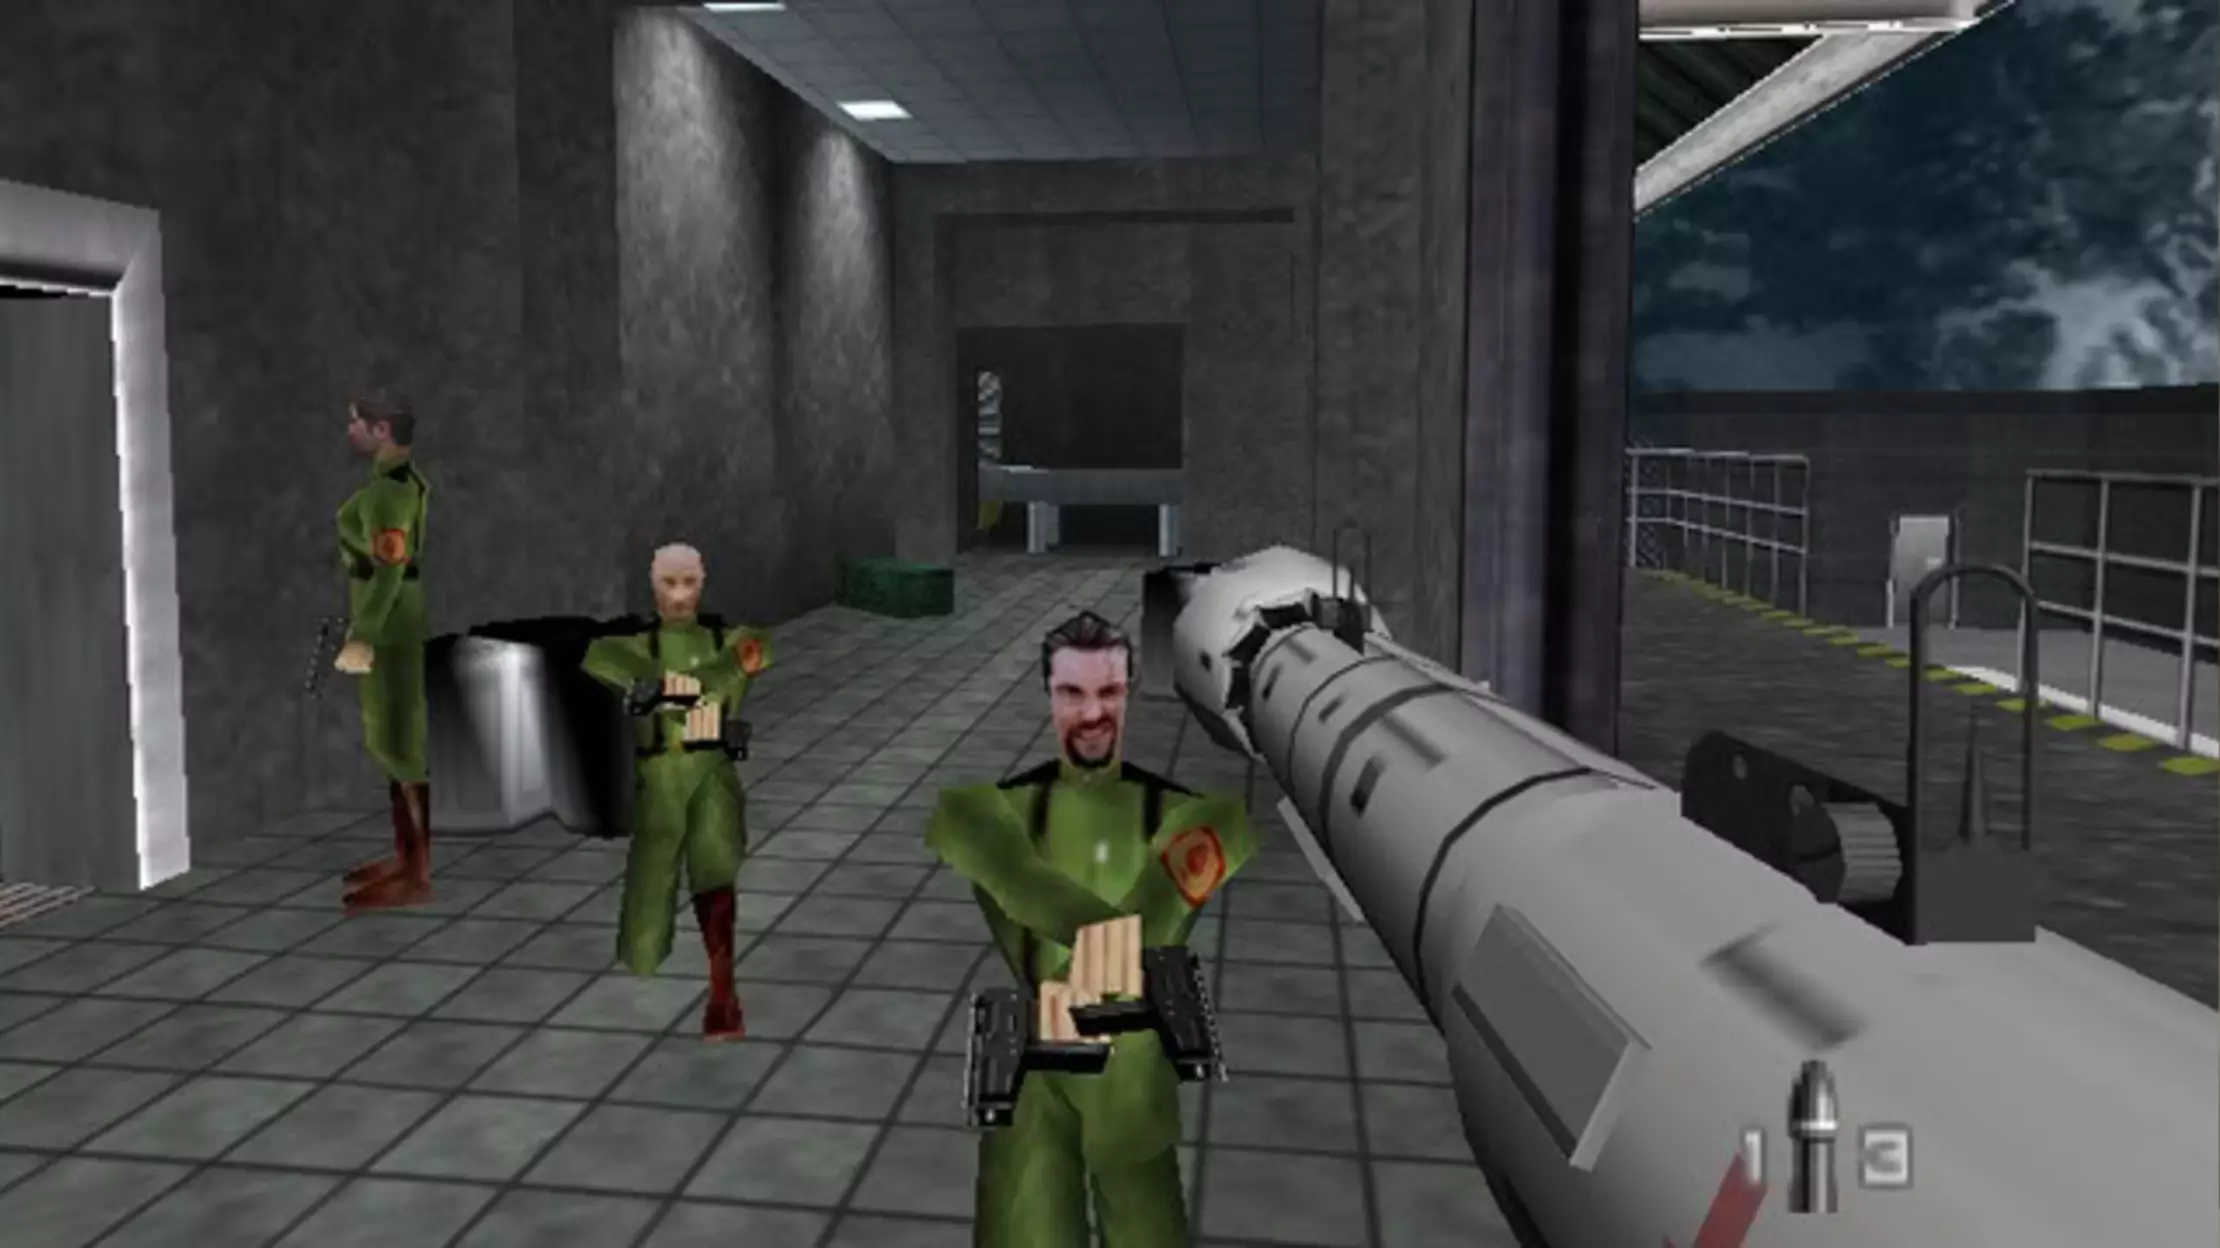 The new documentary on GoldenEye 007 doesn't yet have a release date.